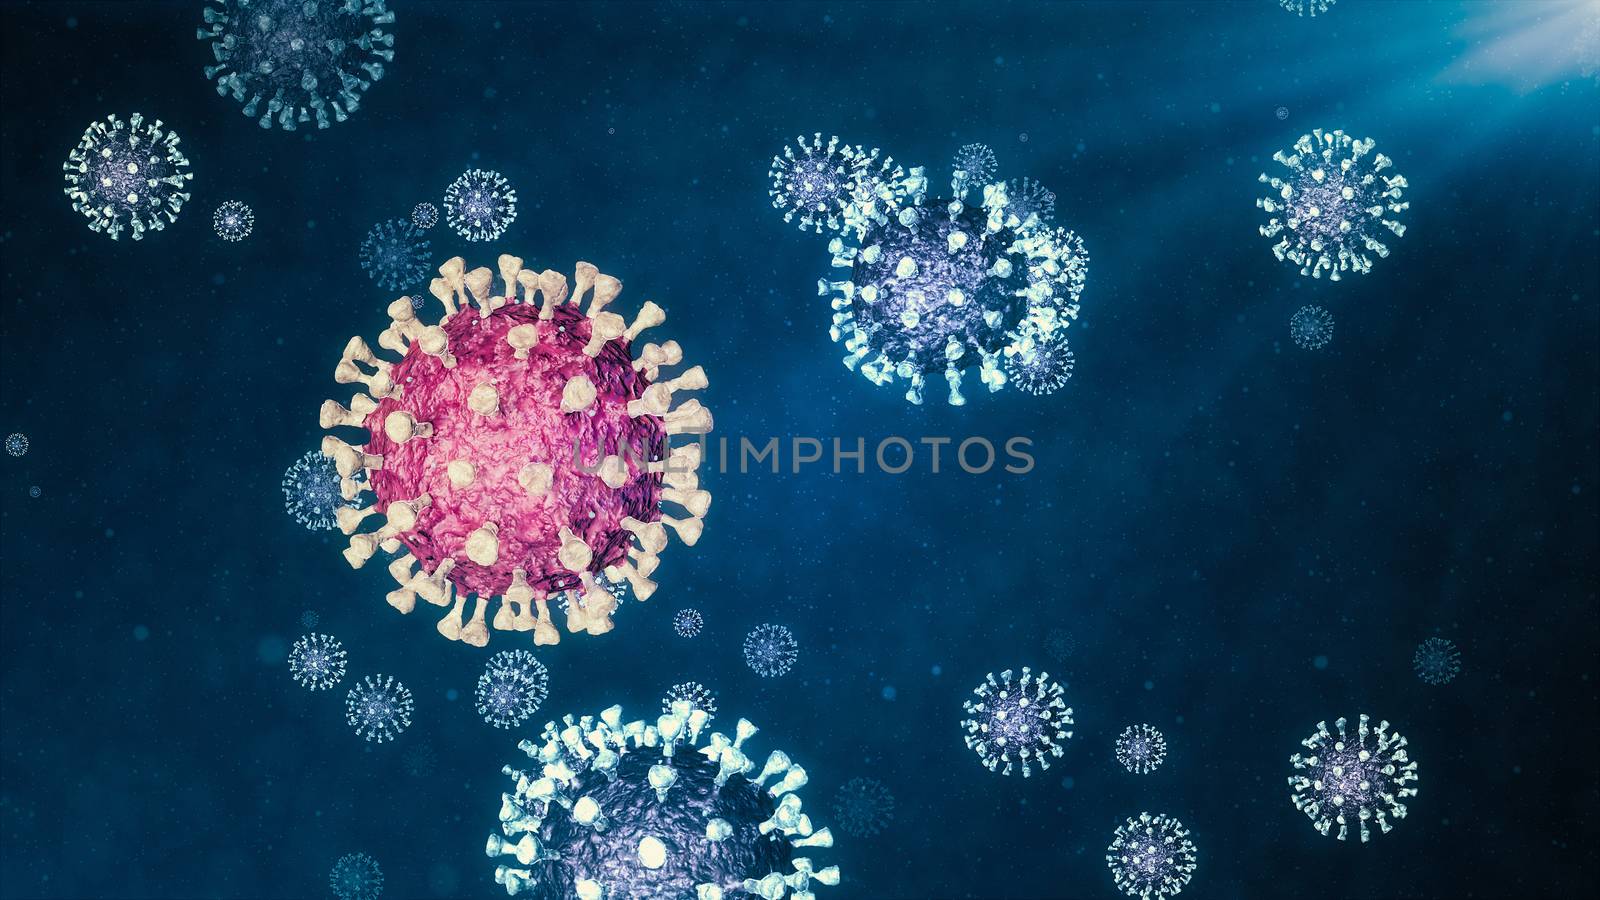 Coronavirus danger and public health risk disease and flu outbre by manaemedia